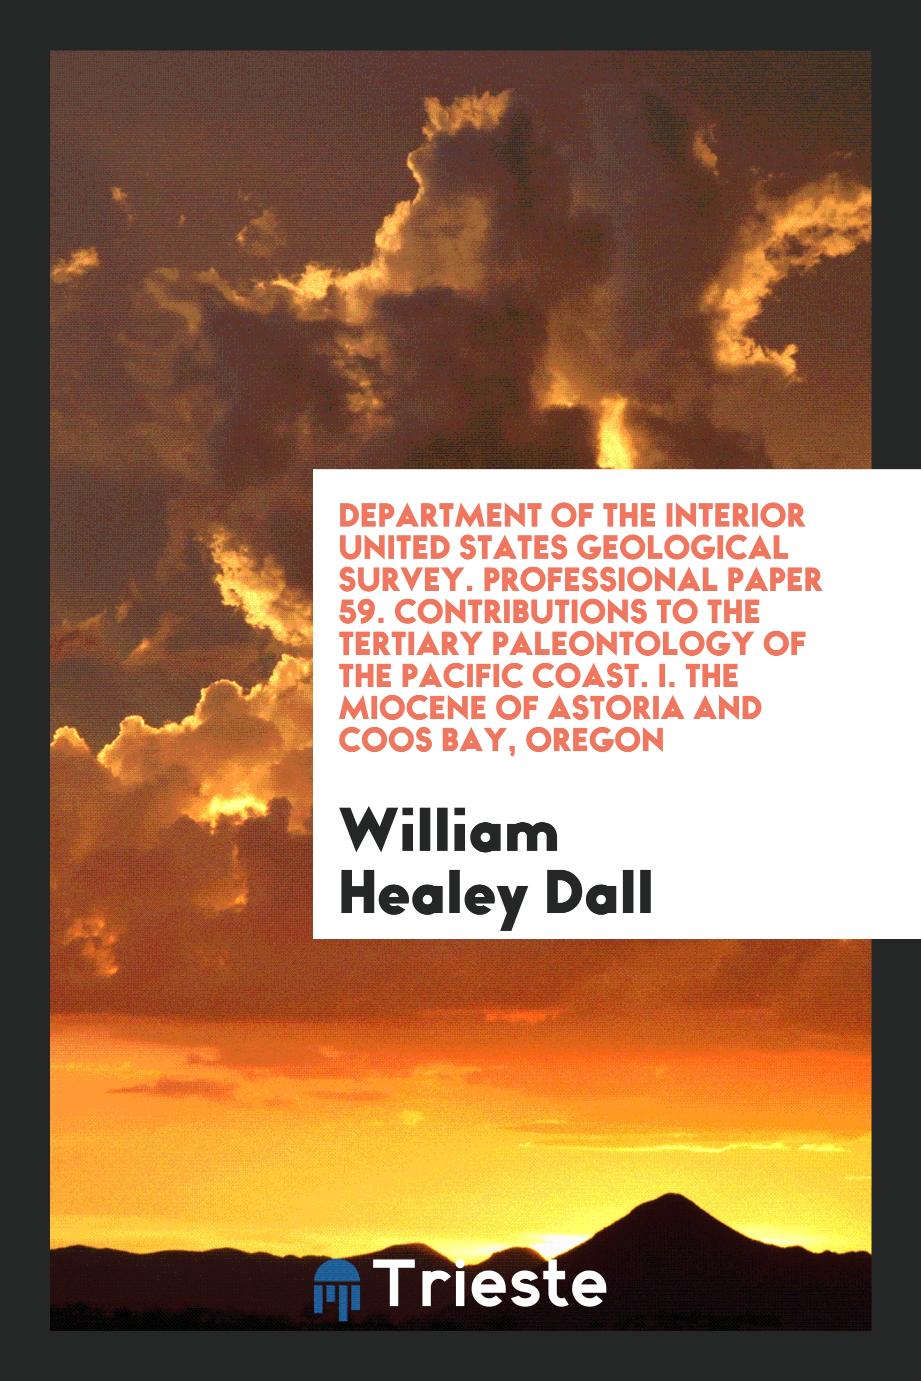 Department of the Interior United States Geological Survey. Professional Paper 59. Contributions to the Tertiary Paleontology of the Pacific Coast. I. The Miocene of Astoria and Coos Bay, Oregon